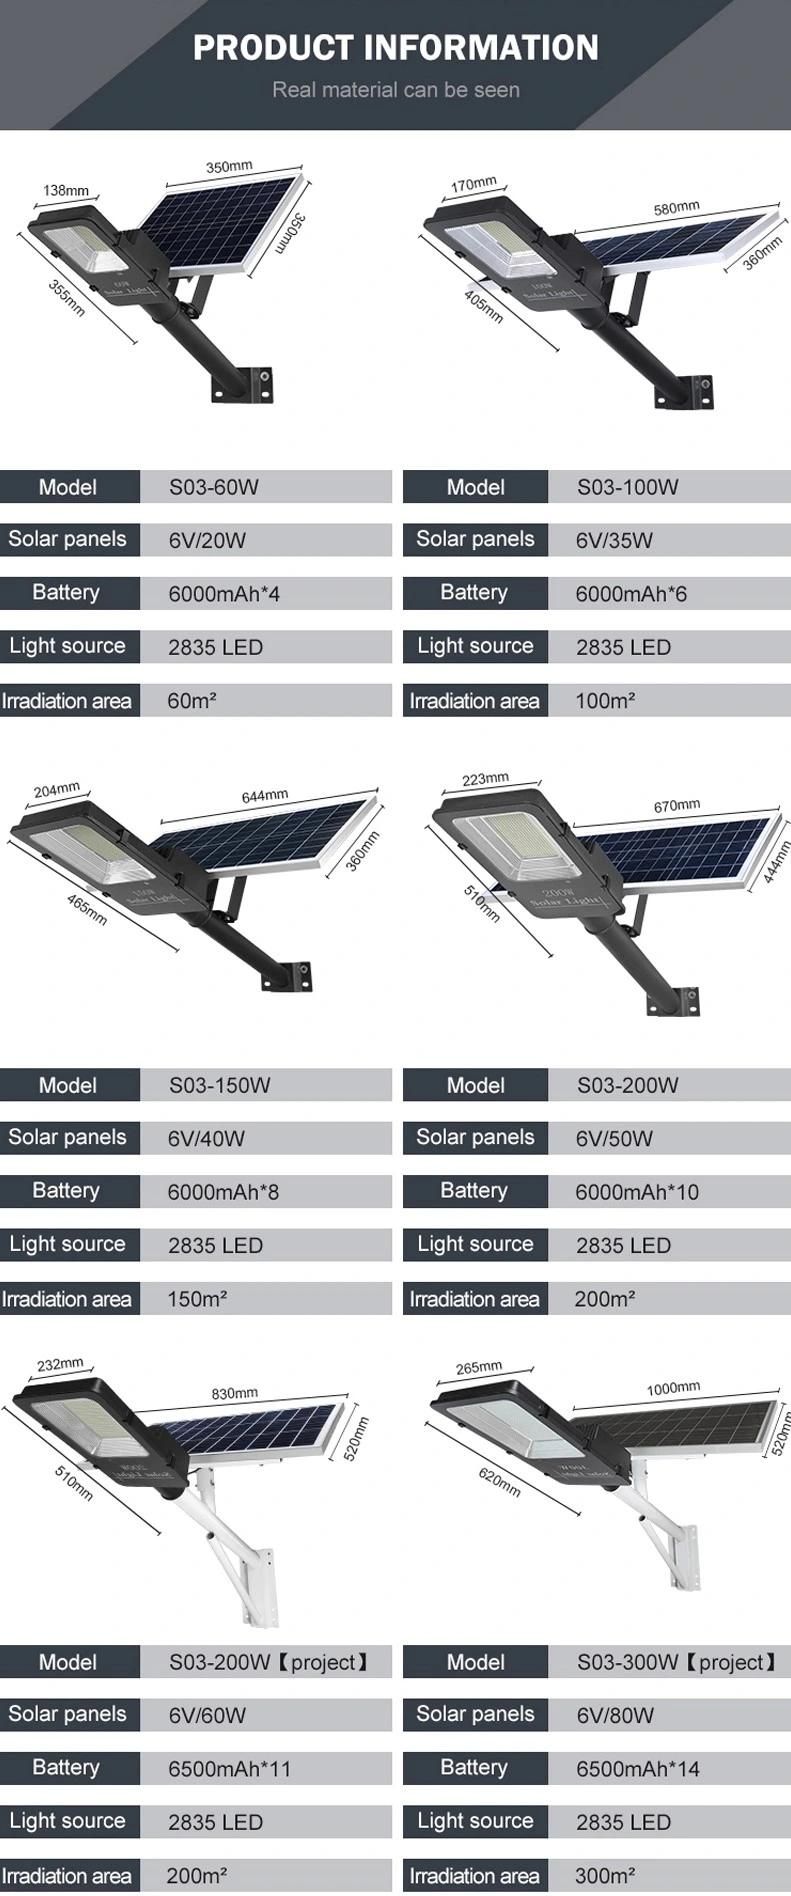 200W Hight Bright Separated LED Solar Streets Lights. 100W 150W 300W Project Road Lighting, Energy Saving Power System Smart Light